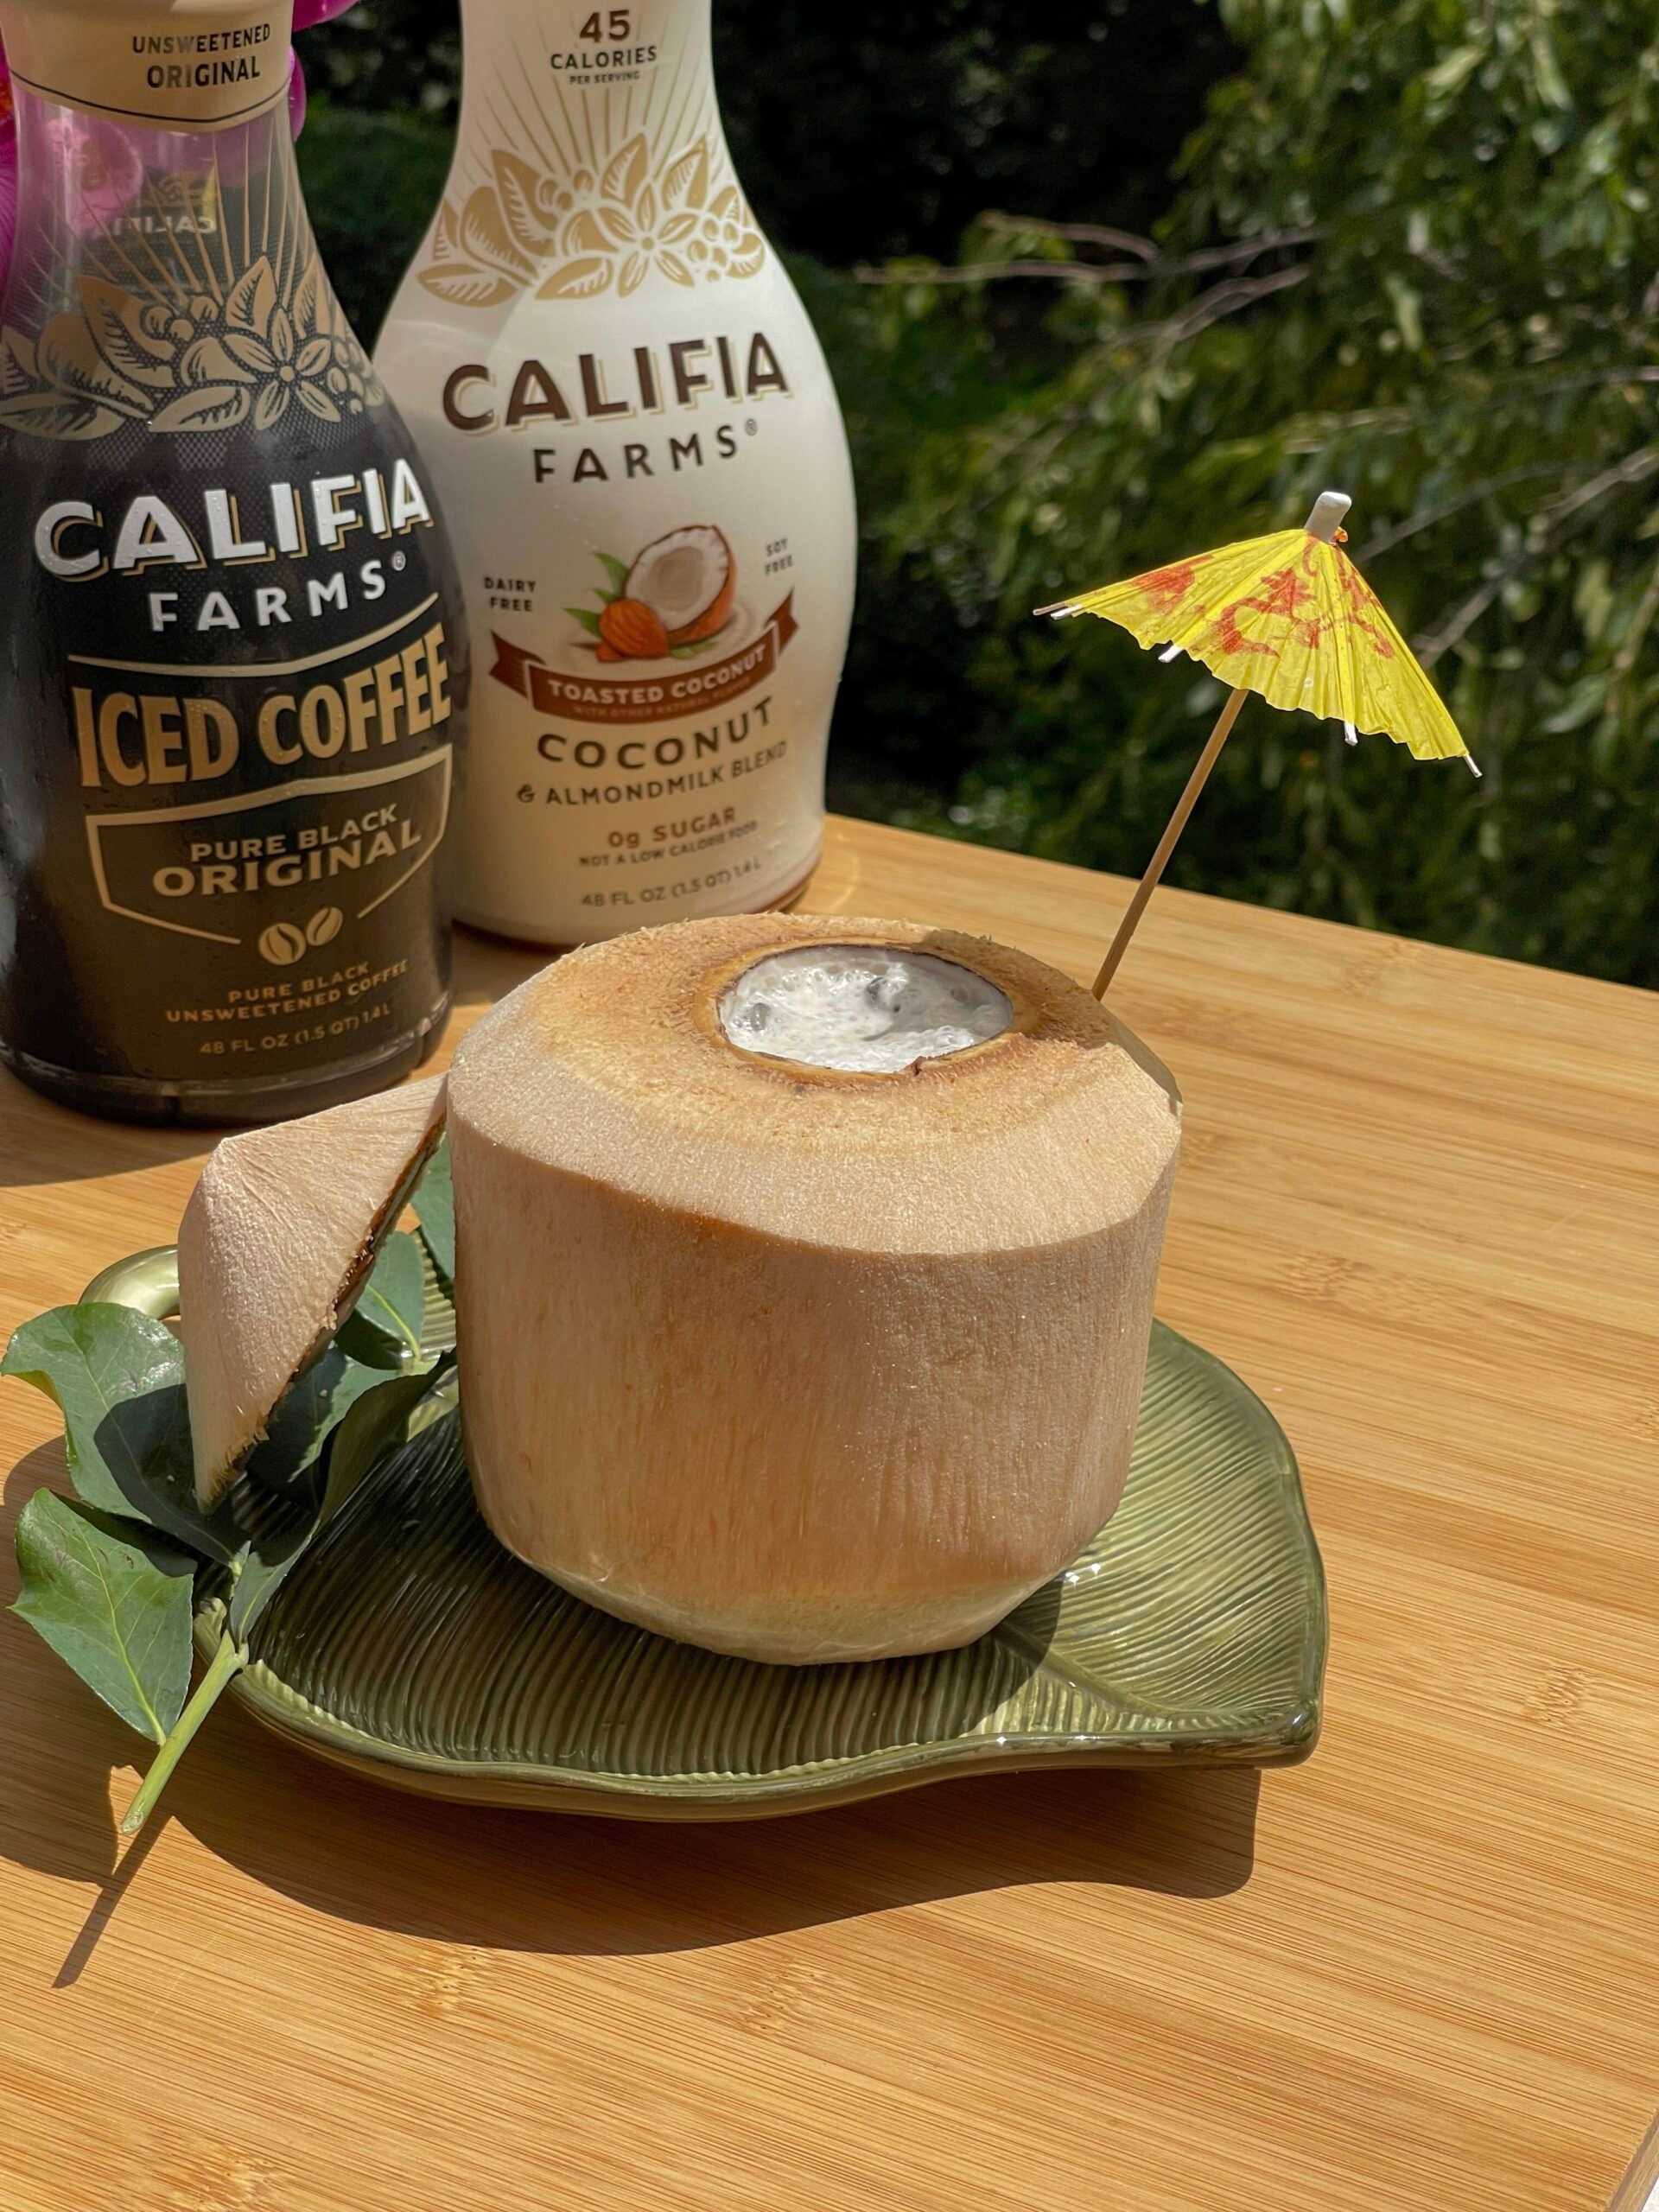 A frothy iced coffee sits inside a coconut at the front of the image, with Califia Farms Iced Coffee and Toasted Coconut Almondmilk behind.